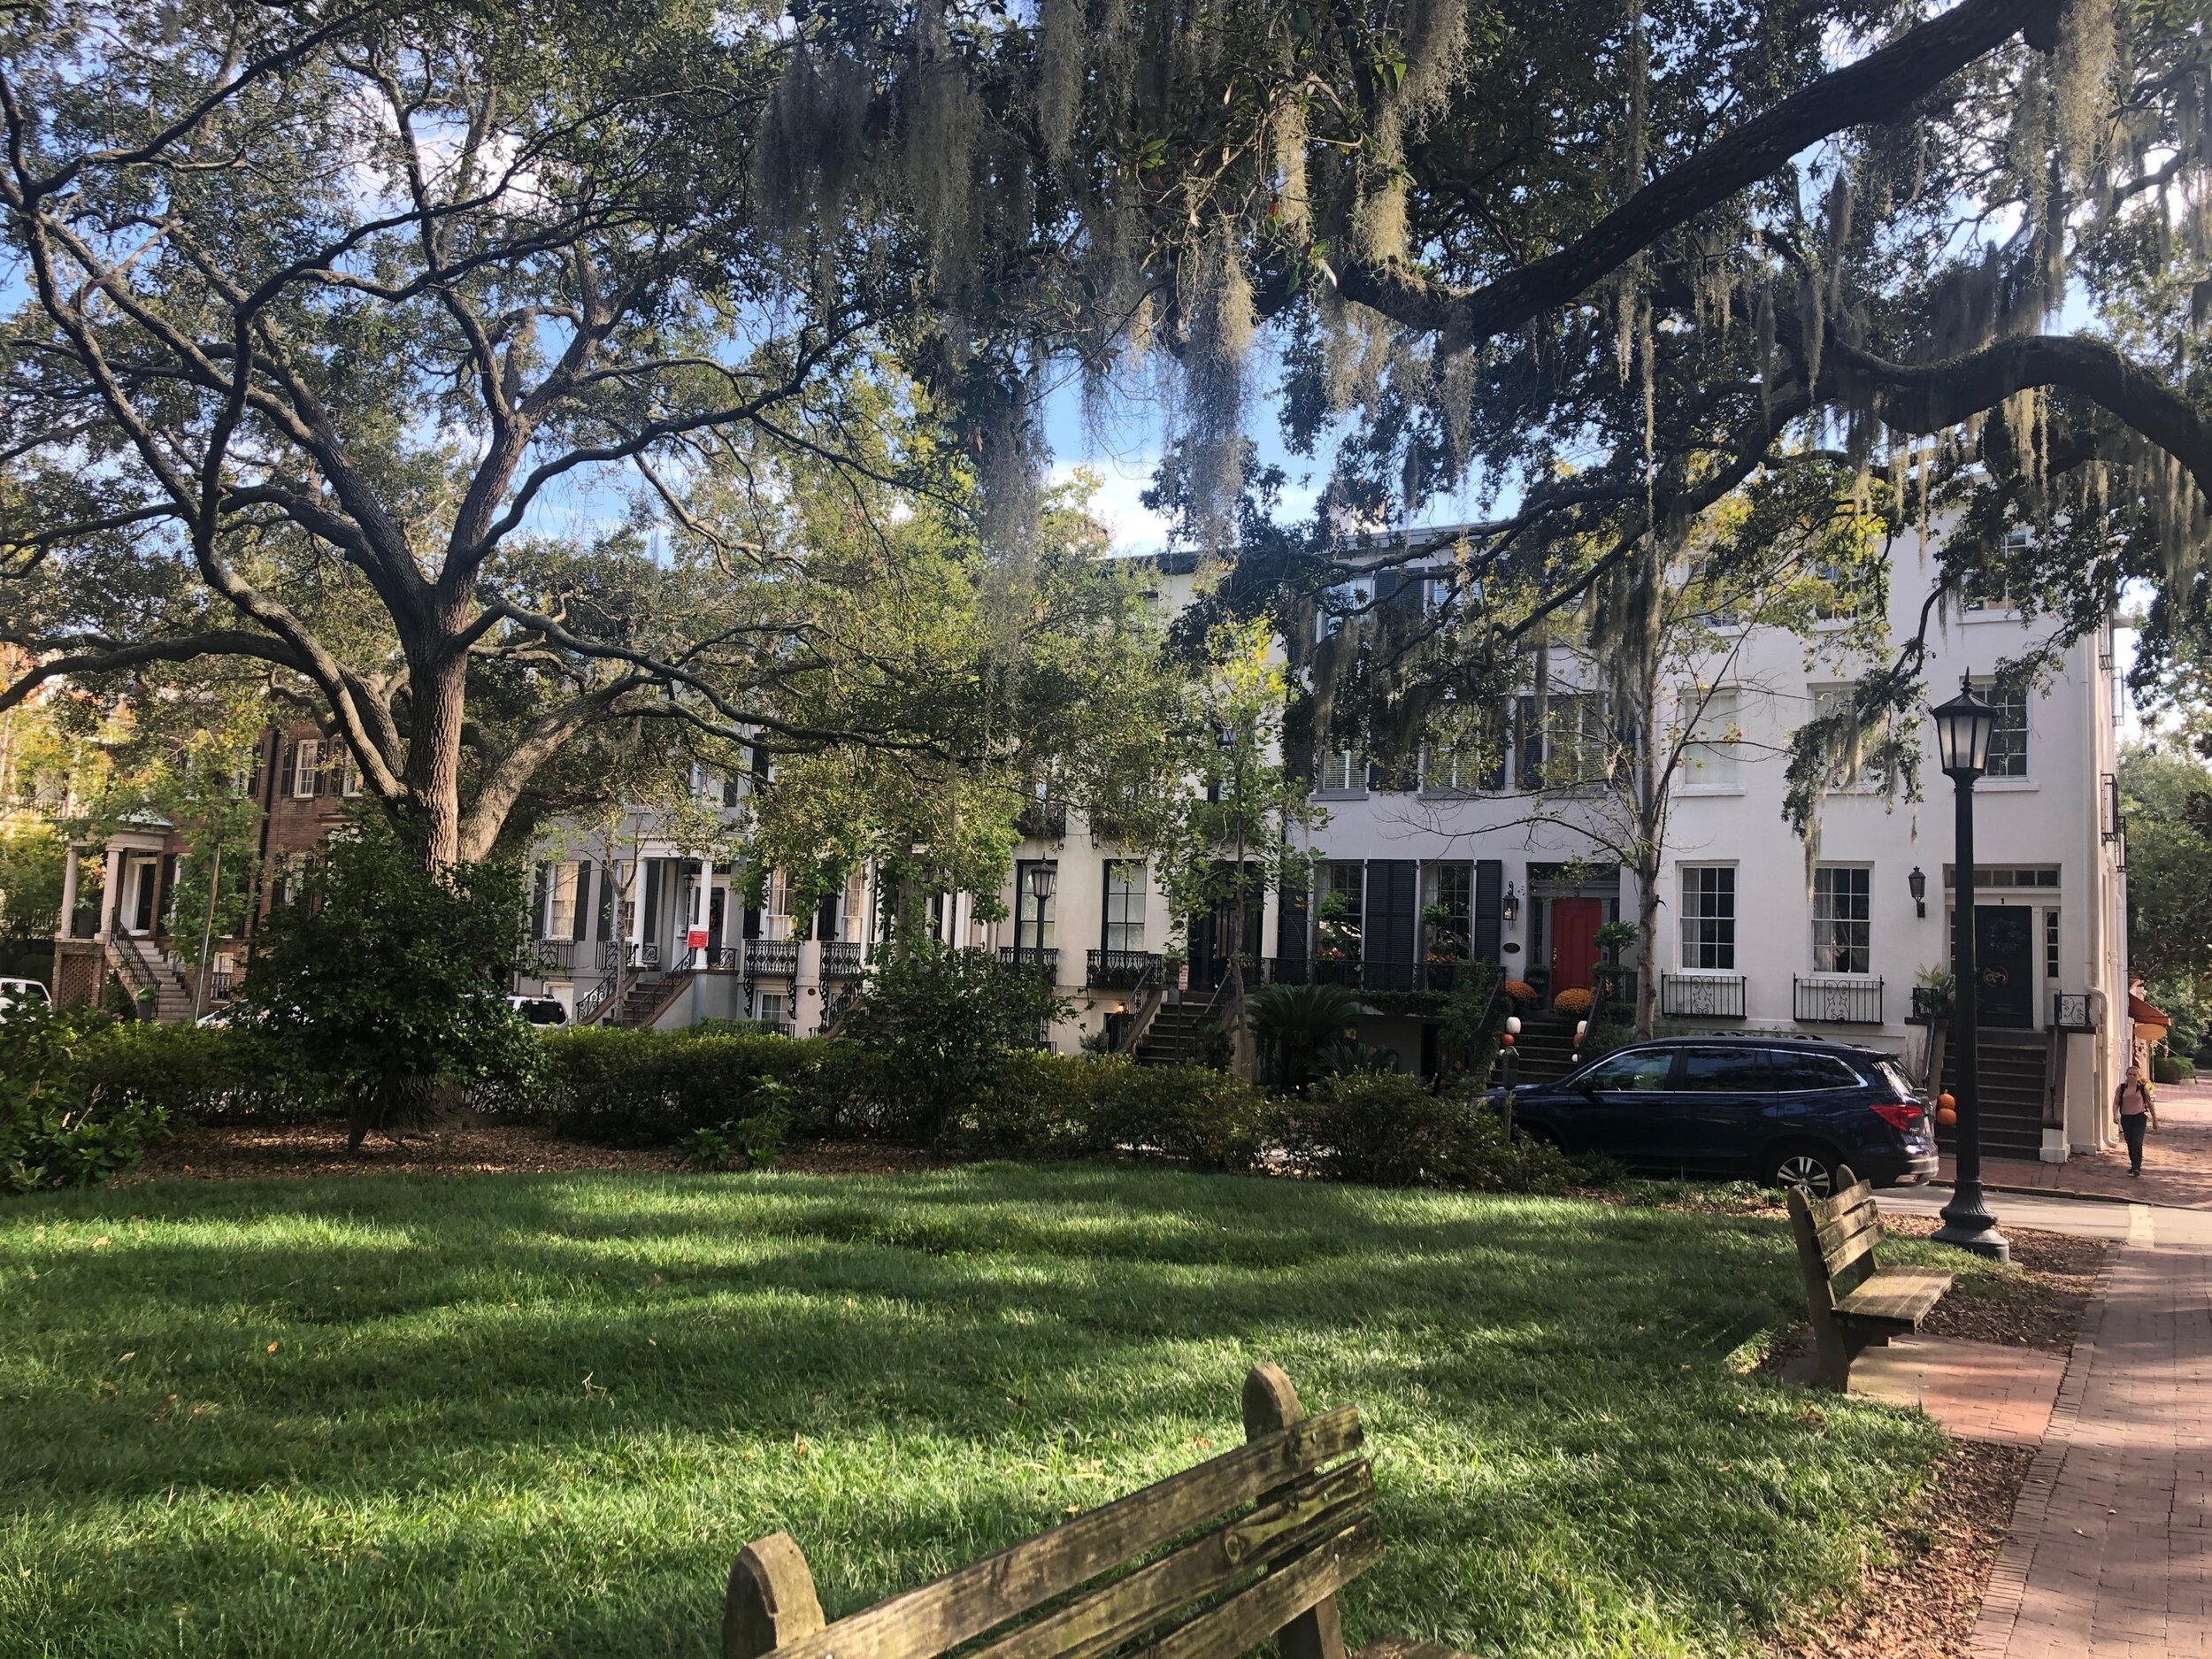 We’ve spent a fair bit of time wandering the squares of Savannah but haven’t tired of these homes and views